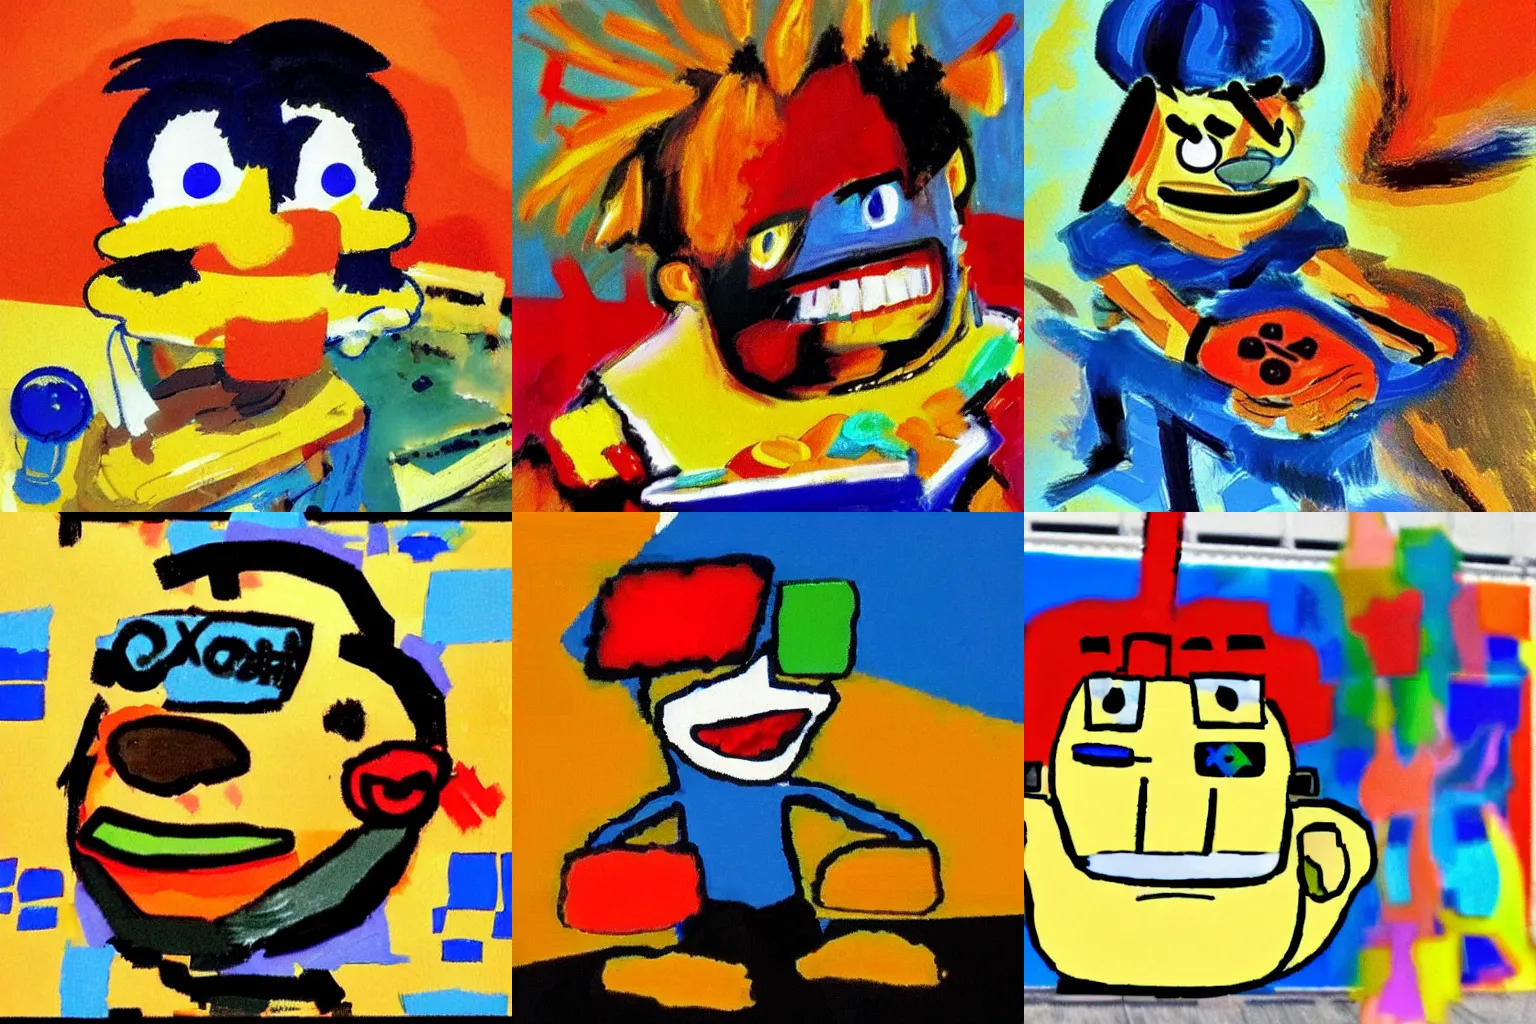 Prompt: A deep fried meme featuring a Playstation 1 character by Karel Appel